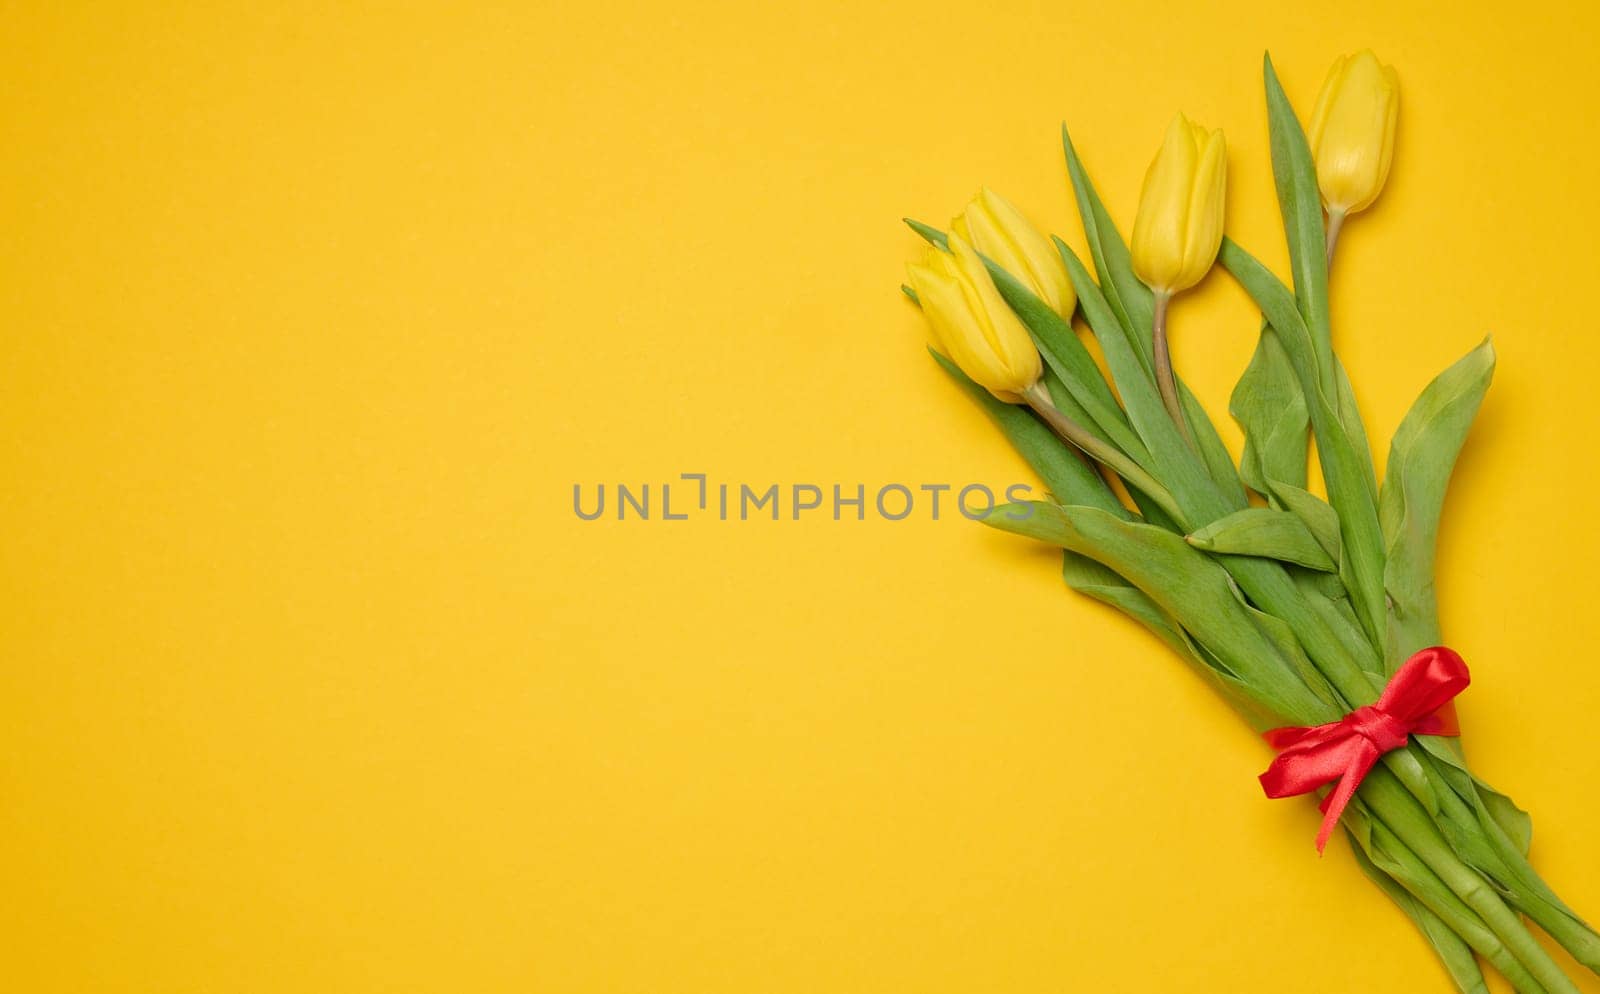 Bouquet of blooming tulips with green leaves on a yellow background, top view. Copy space